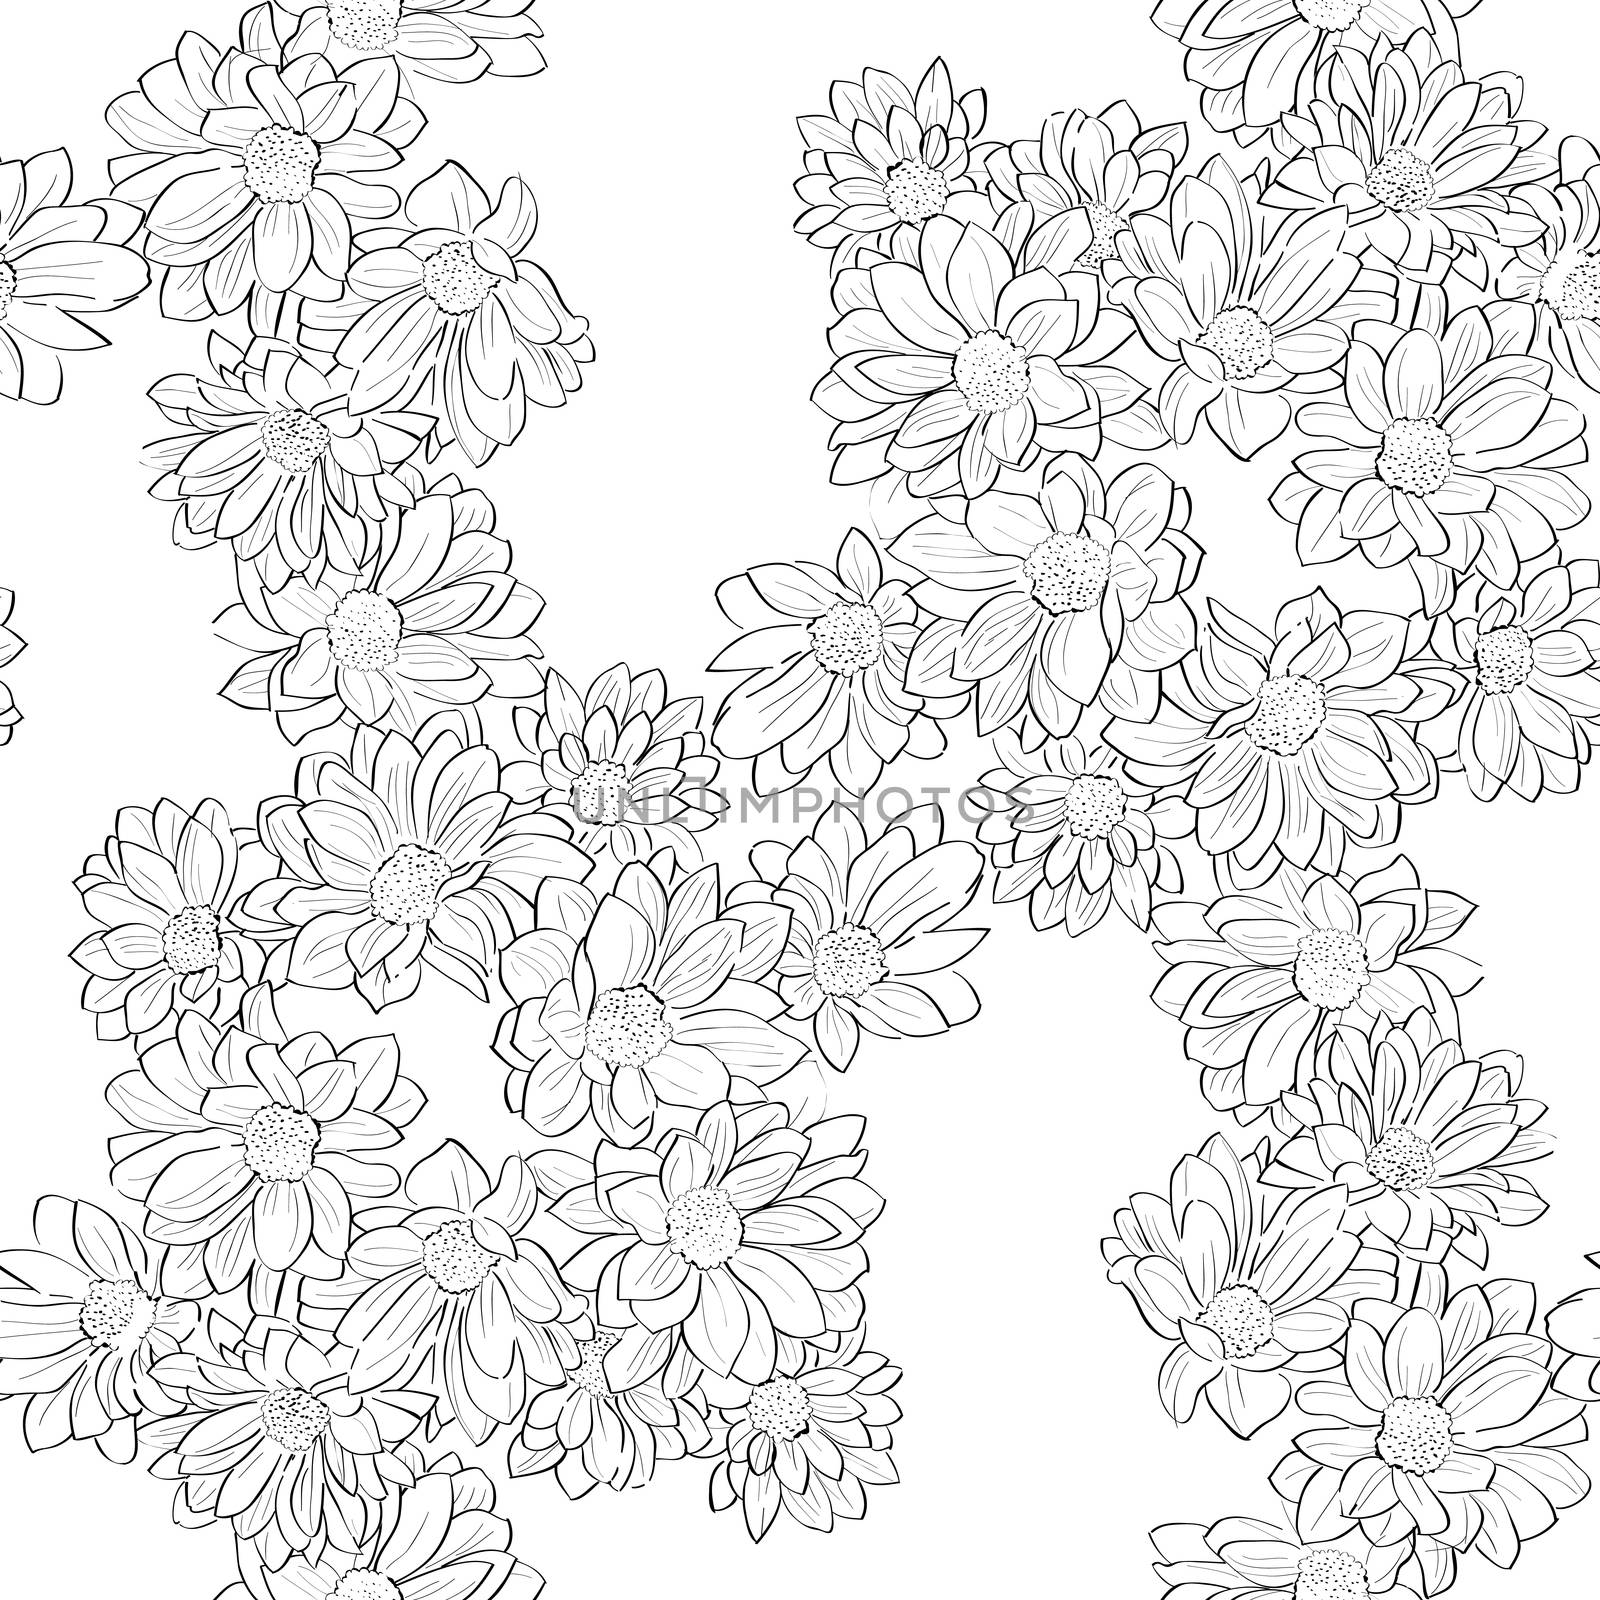 Seamless retro pattern with daisies drawing illustration over white